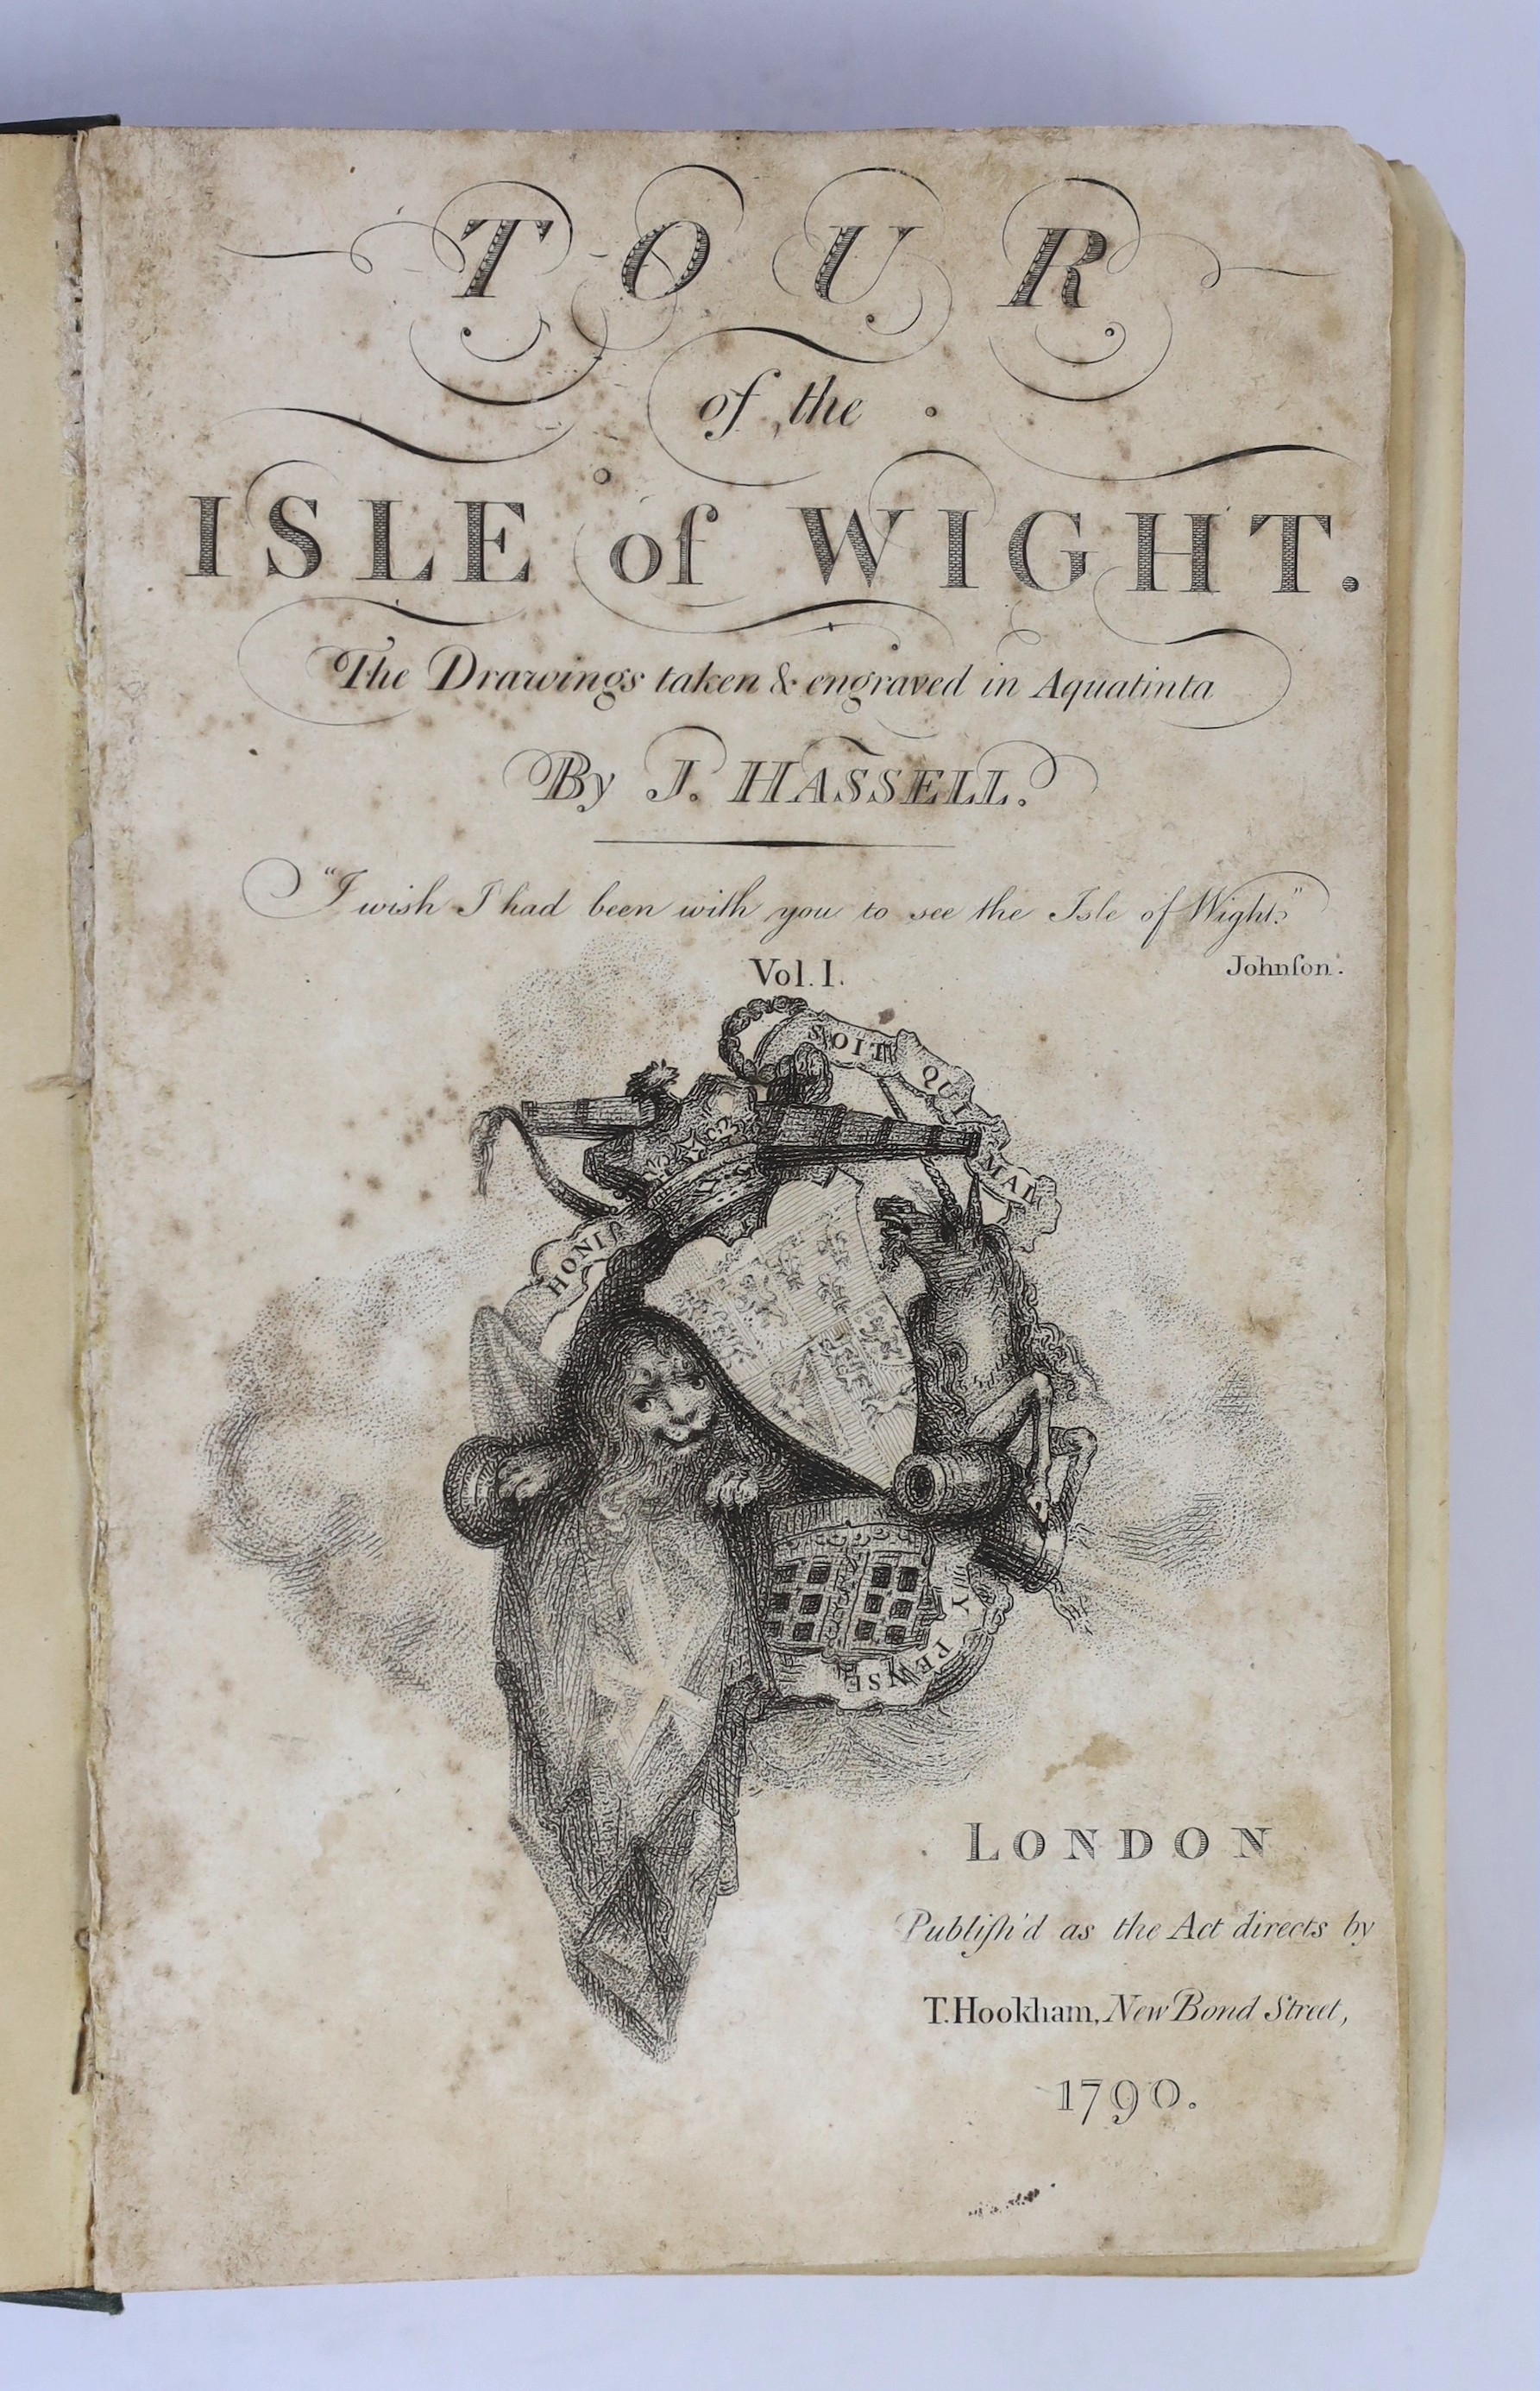 ISLE OF WIGHT: (Hookham, T.) Tour of the Isle of Wight. The drawings taken and engraved by J. Hassell ... 2 vols. (bound as one). pictorial engraved and printed titles and 30 tinted aquatint plates, subscribers list; lat